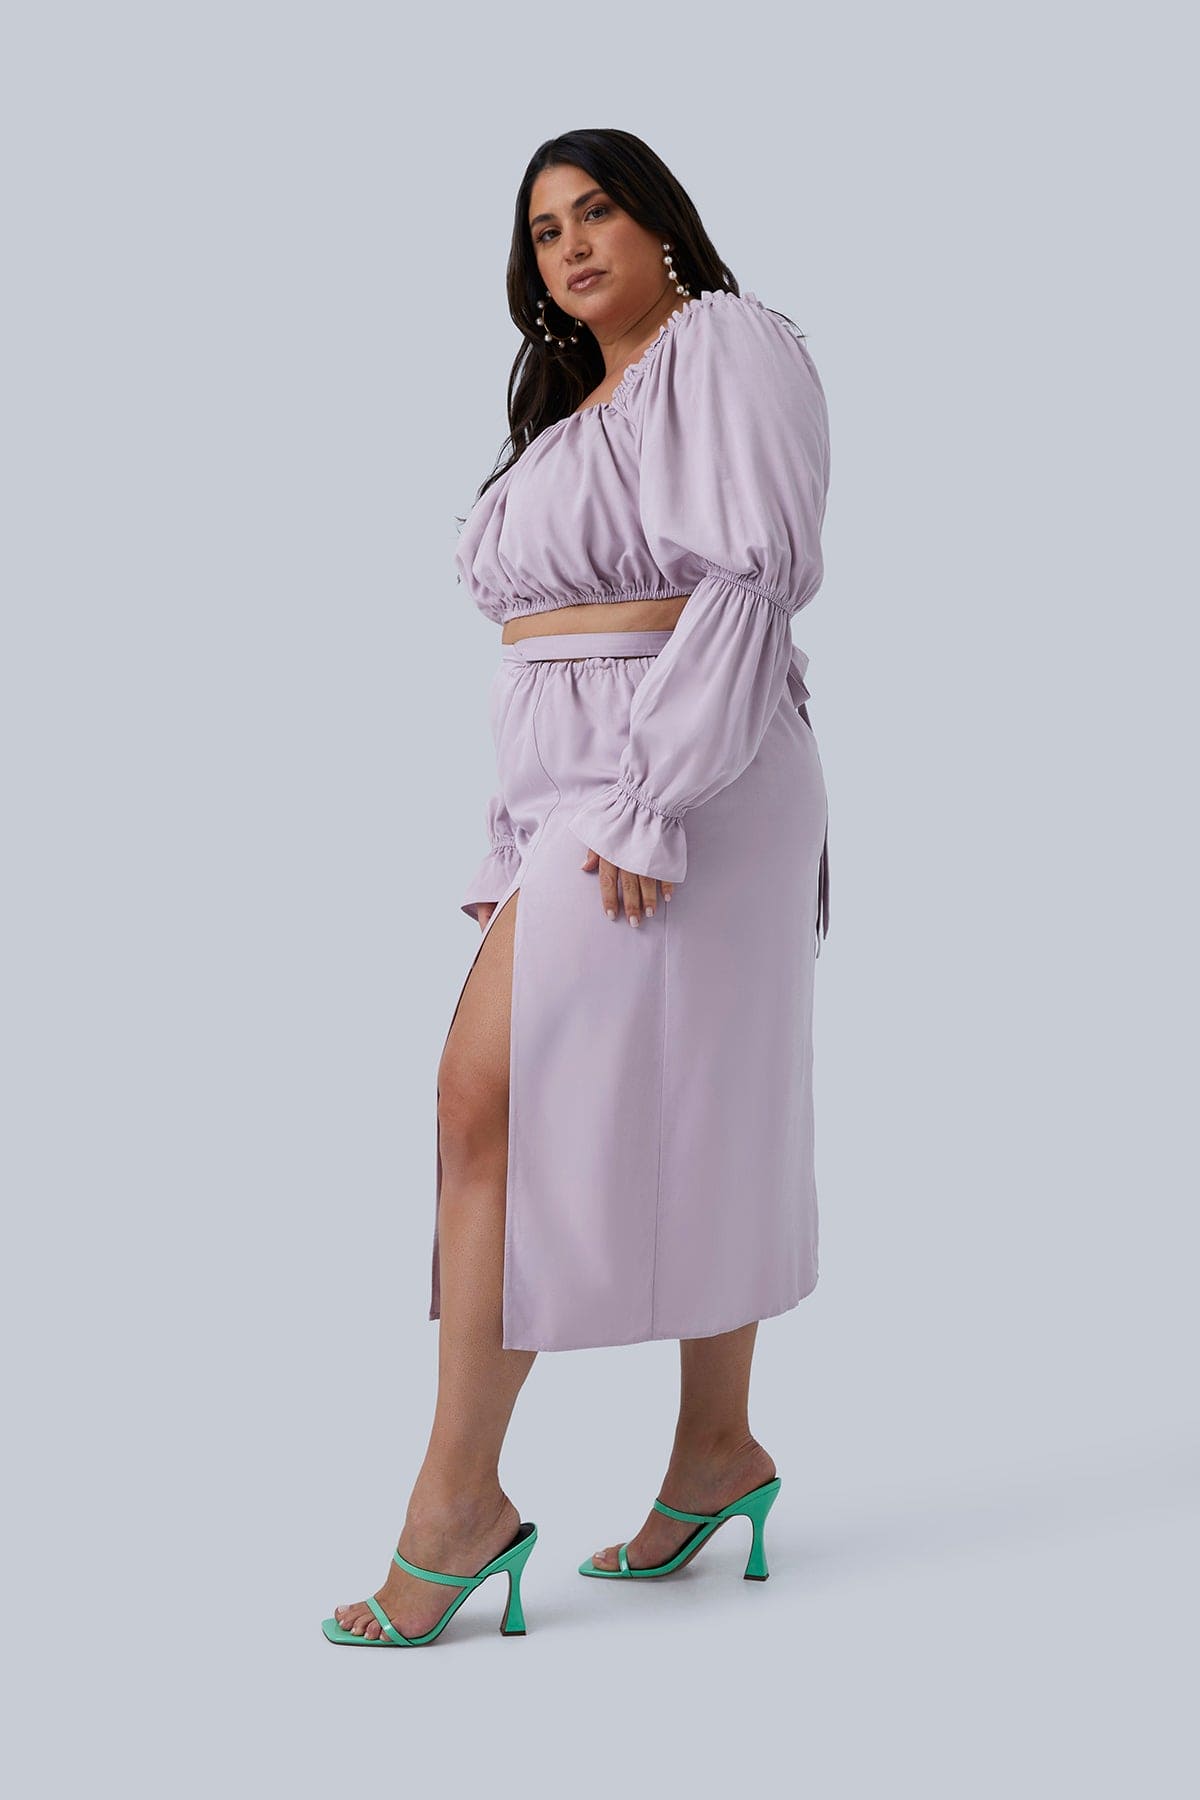 Side slit view of the Gia Skirt size 2X. Model is the founder of Gia IRL, Gia Sinatra, plus size model and body positivity advocate. Gia is also wearing the Gia Top which is sold separately from the skirt in a set for plus size women. Shop Gia IRL plus size boutique.